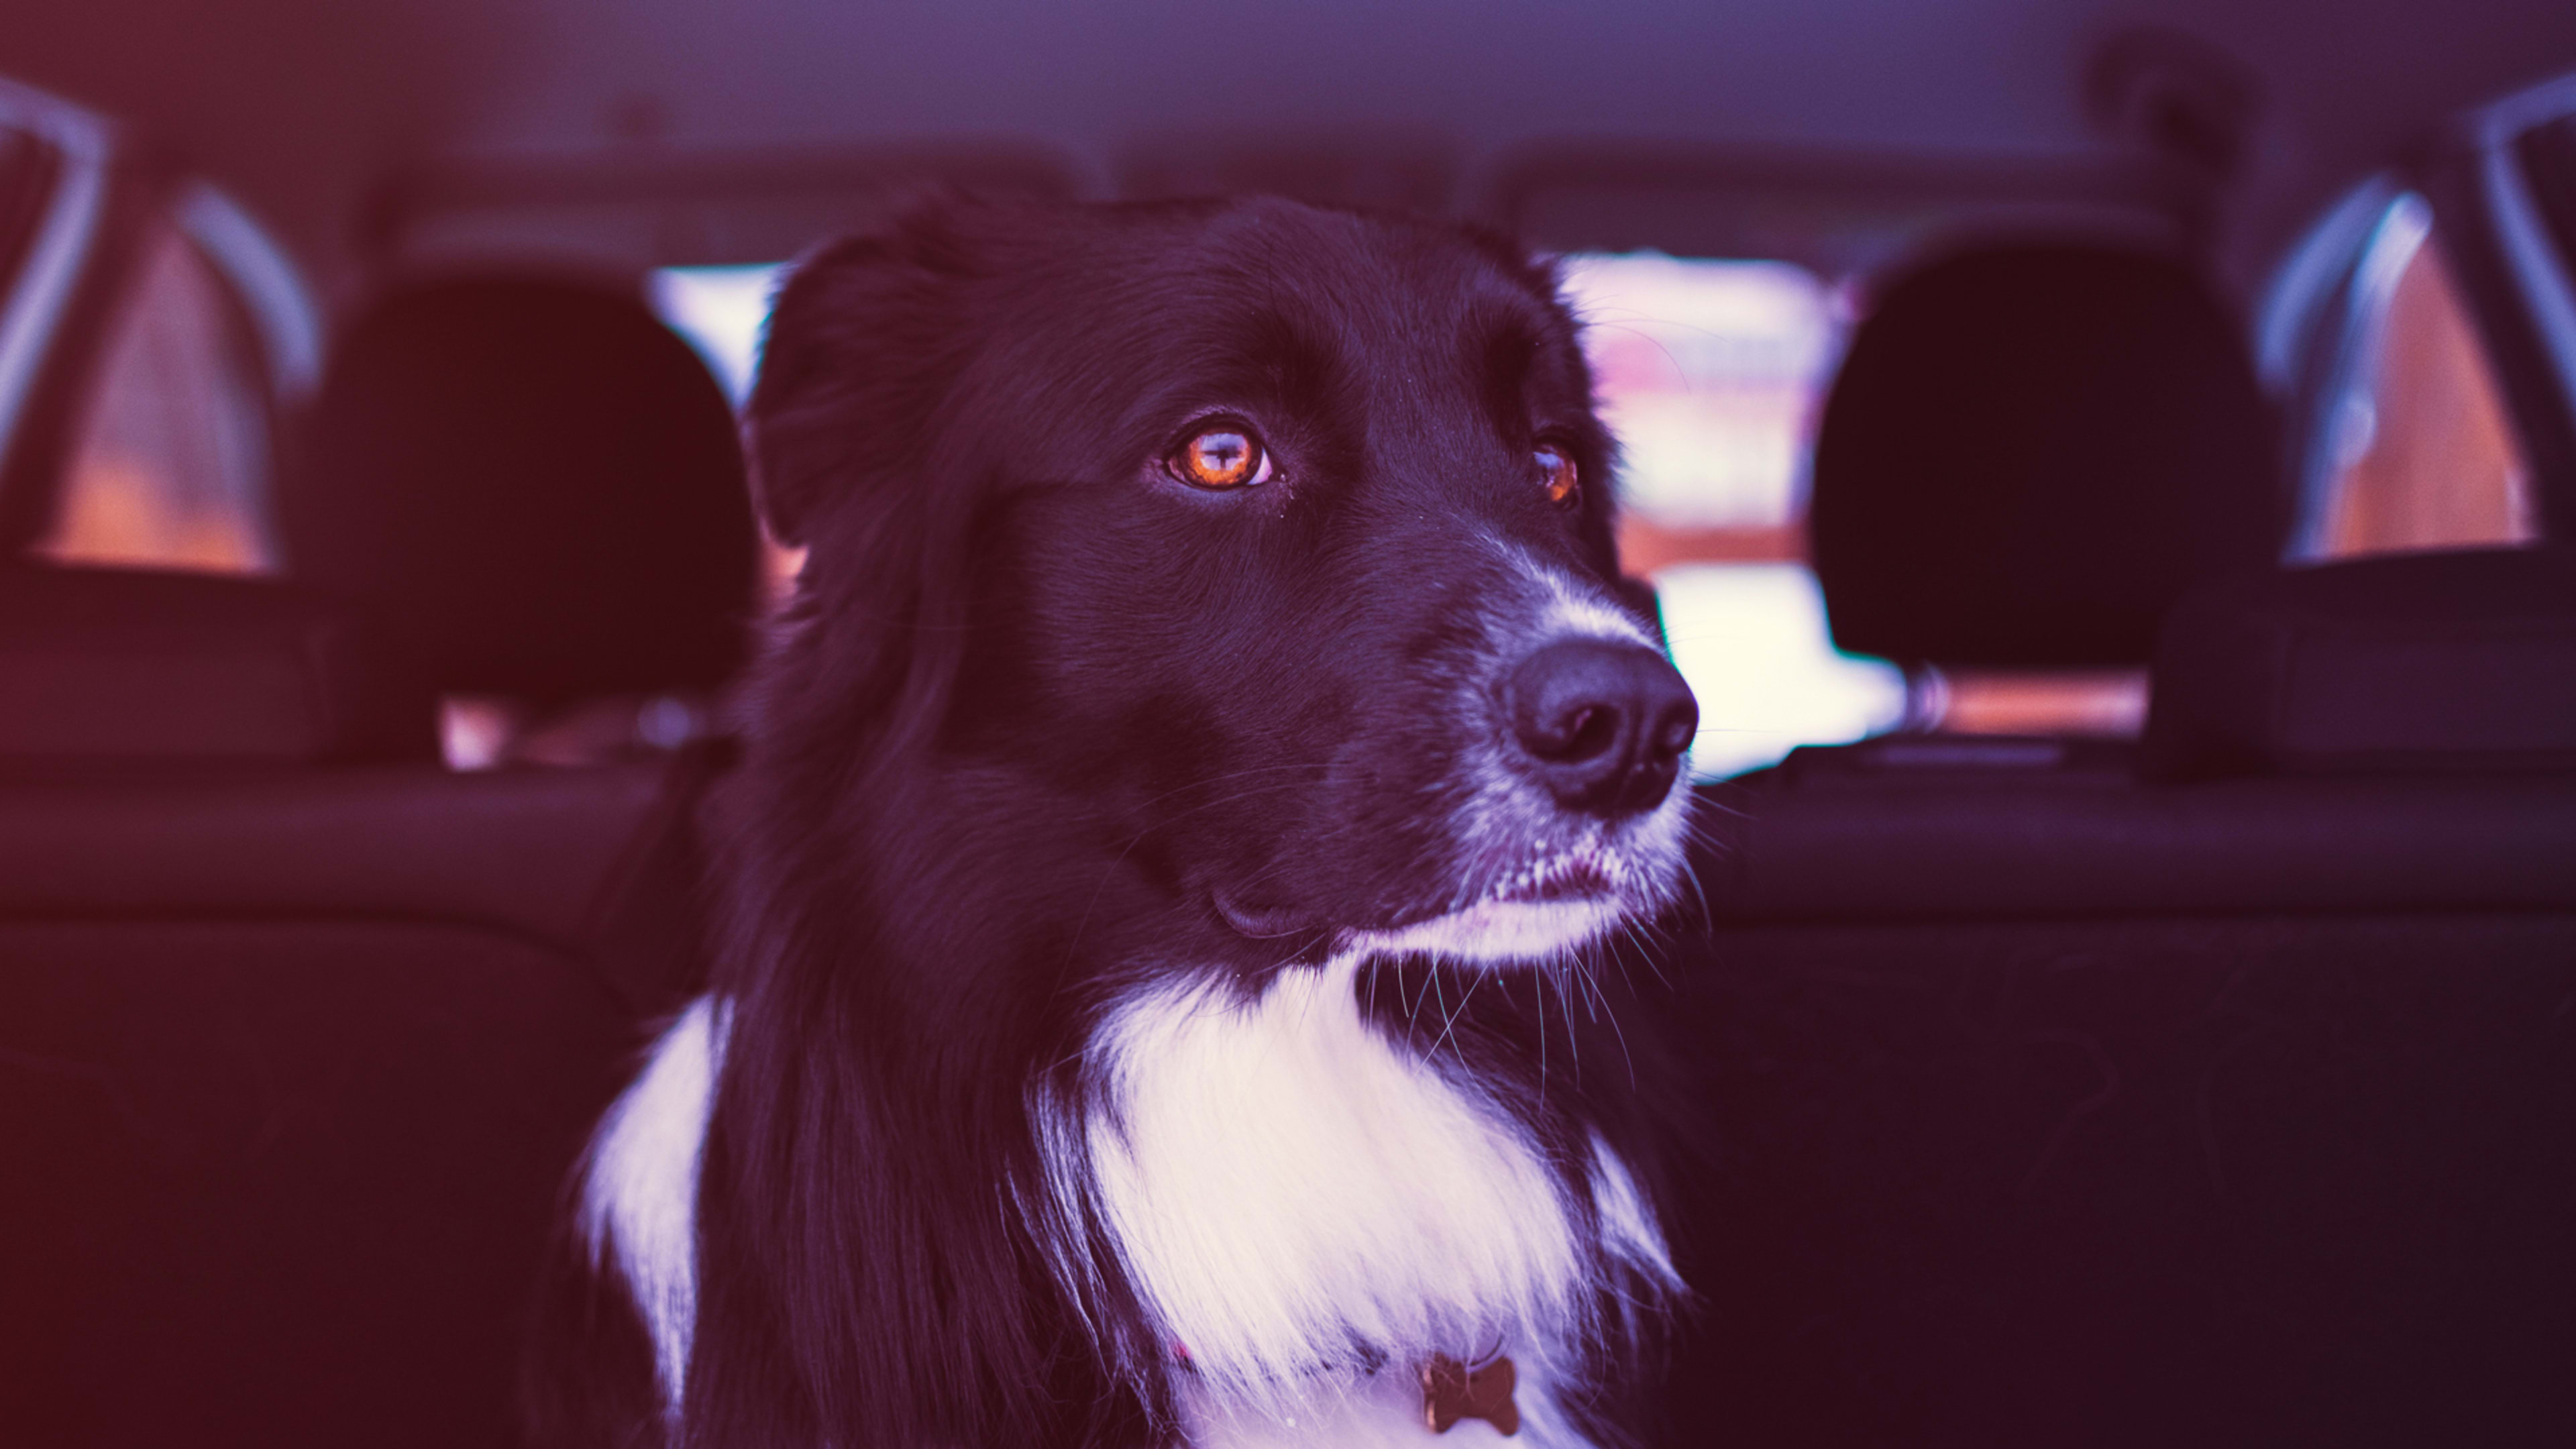 Uber finally throws dog owners a bone with a pet ride-hailing option in some cities